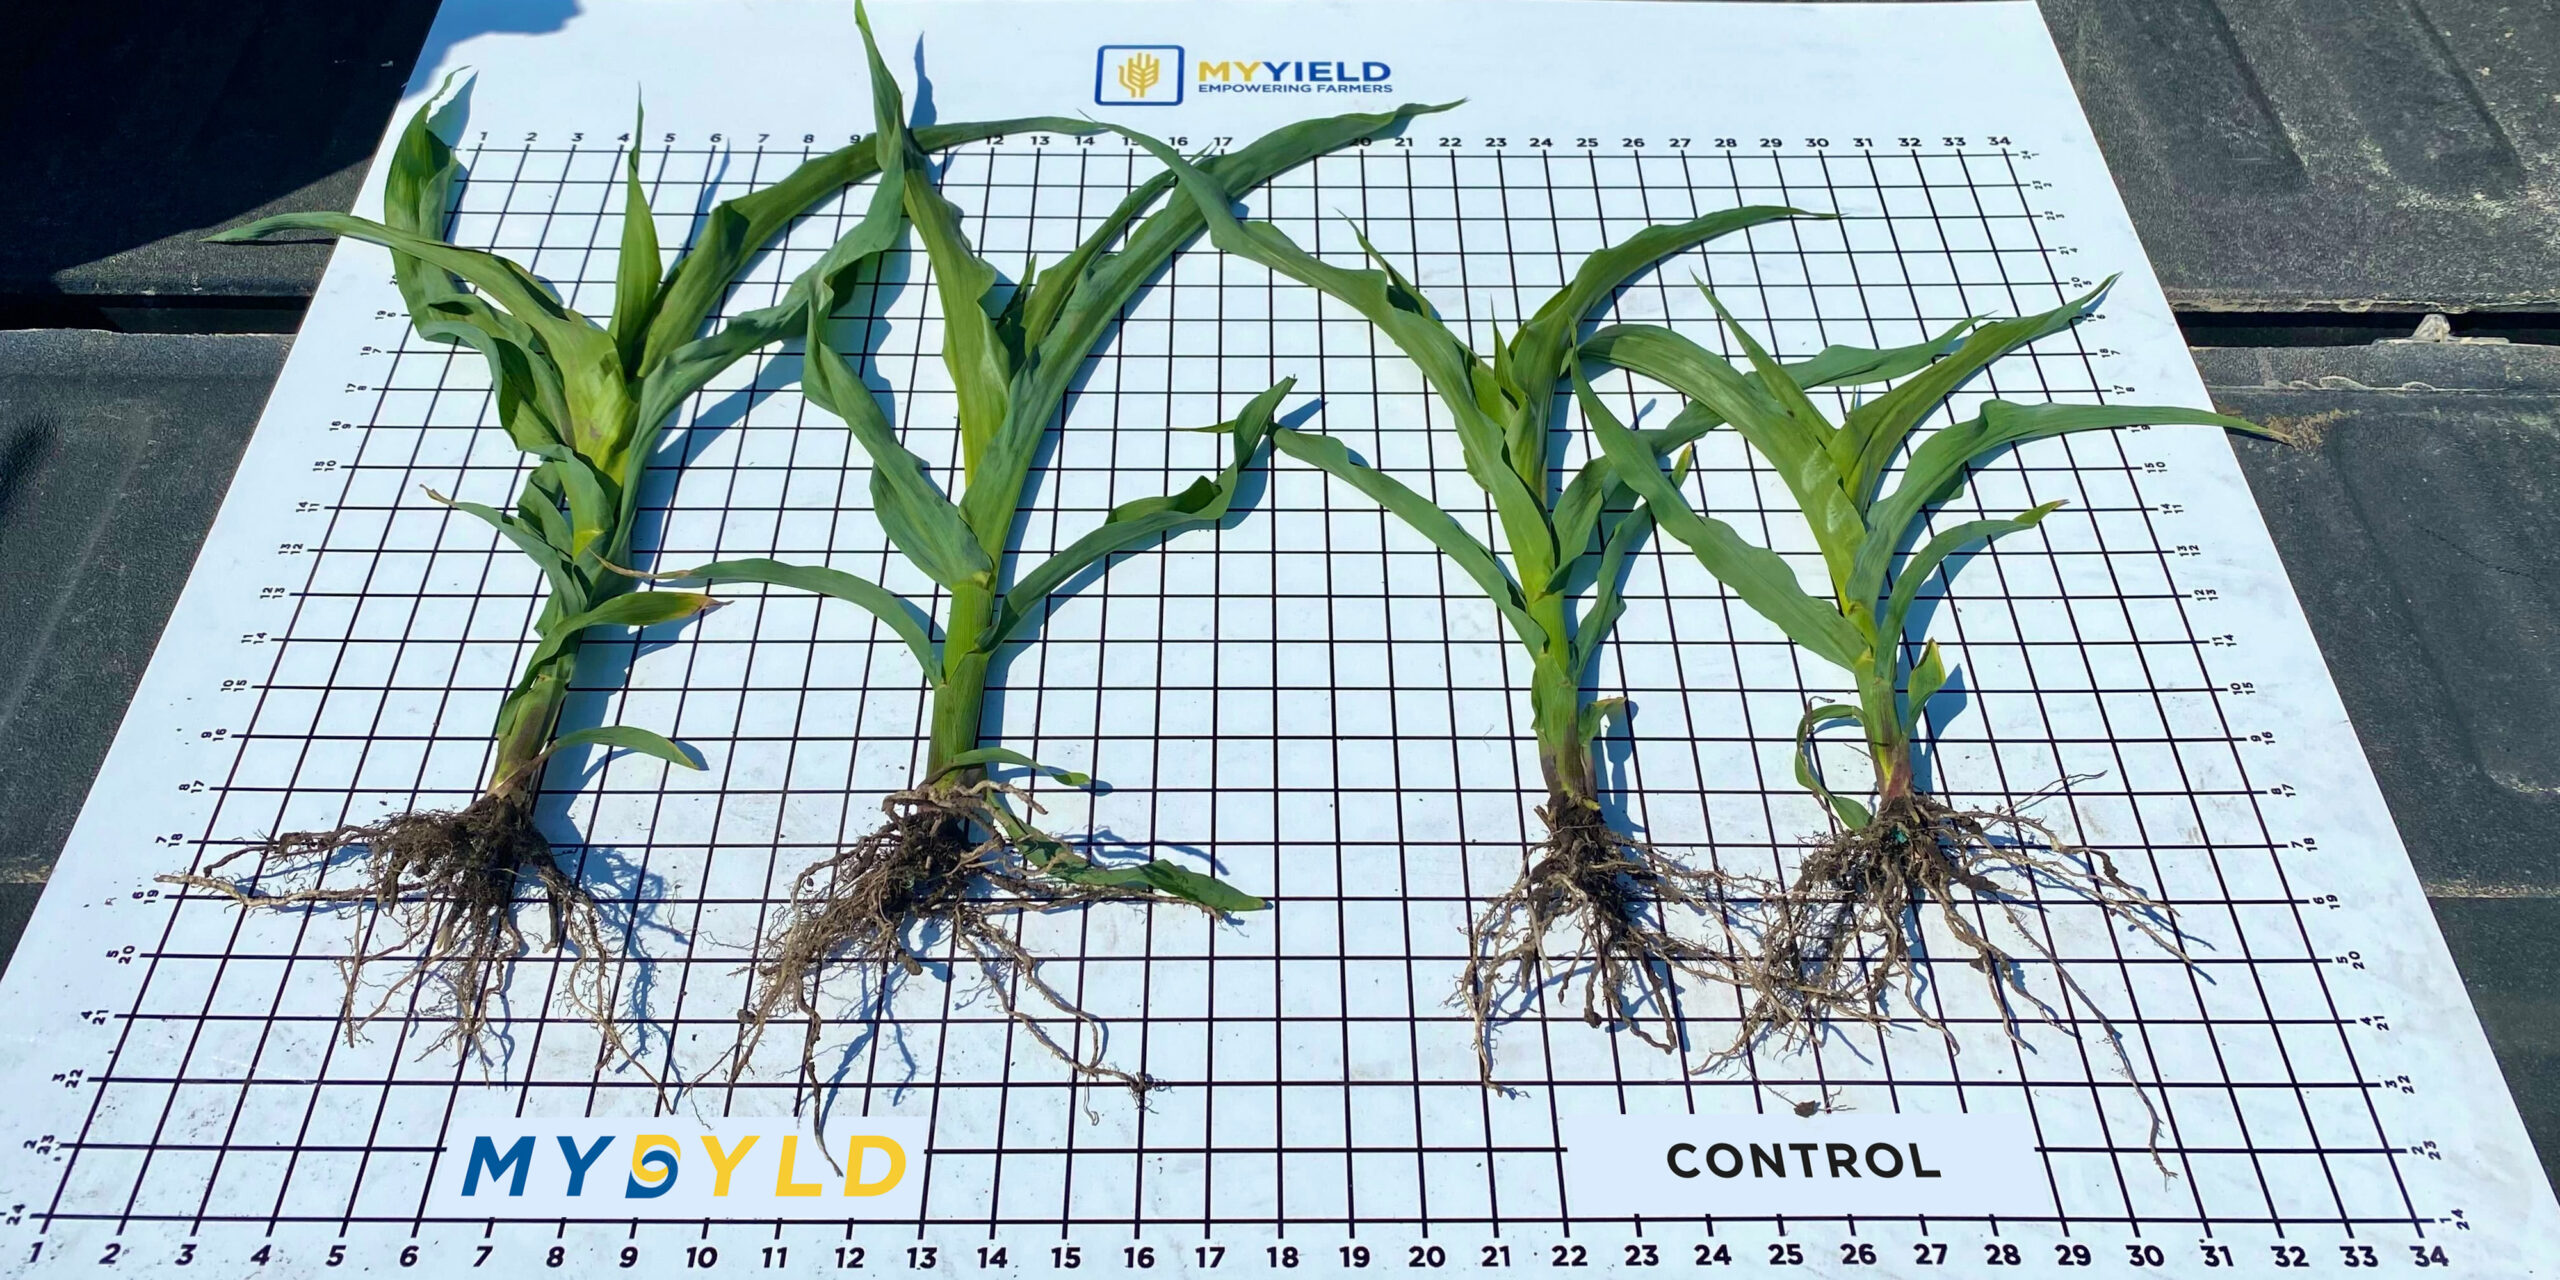 Picture of plants grown with My Yield Biologicals that are significantly larger than plants in a control group